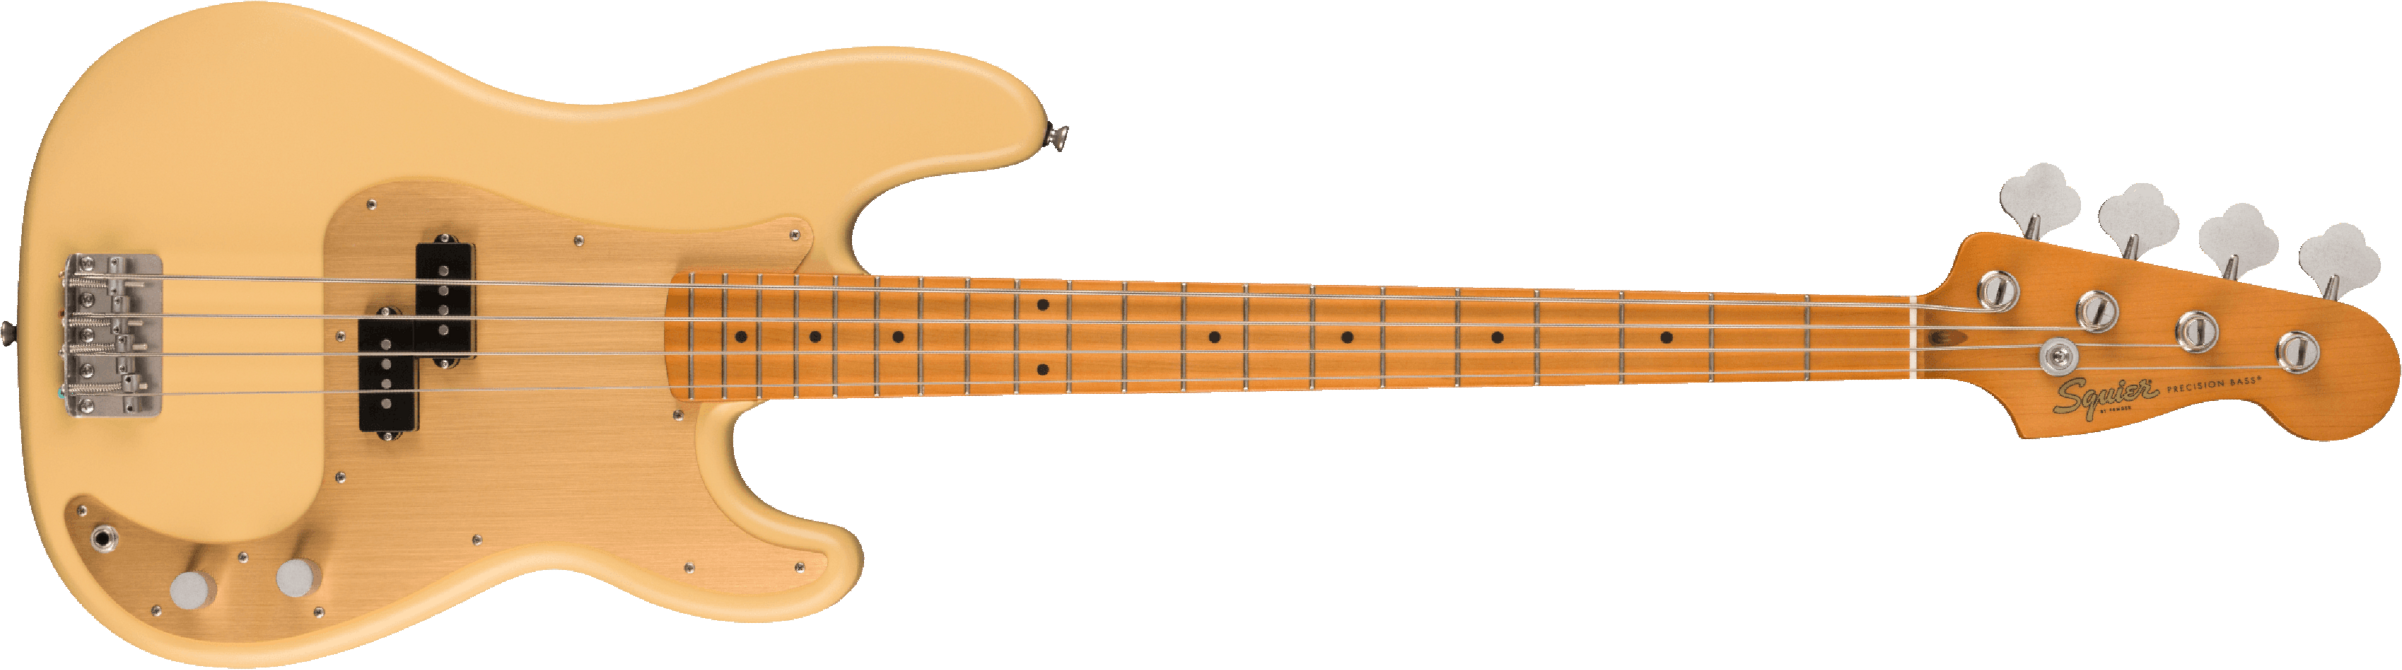 Squier Precision Bass 40th Anniversary Gold Edition Mn - Satin Vintage Blonde - Solidbody E-bass - Main picture